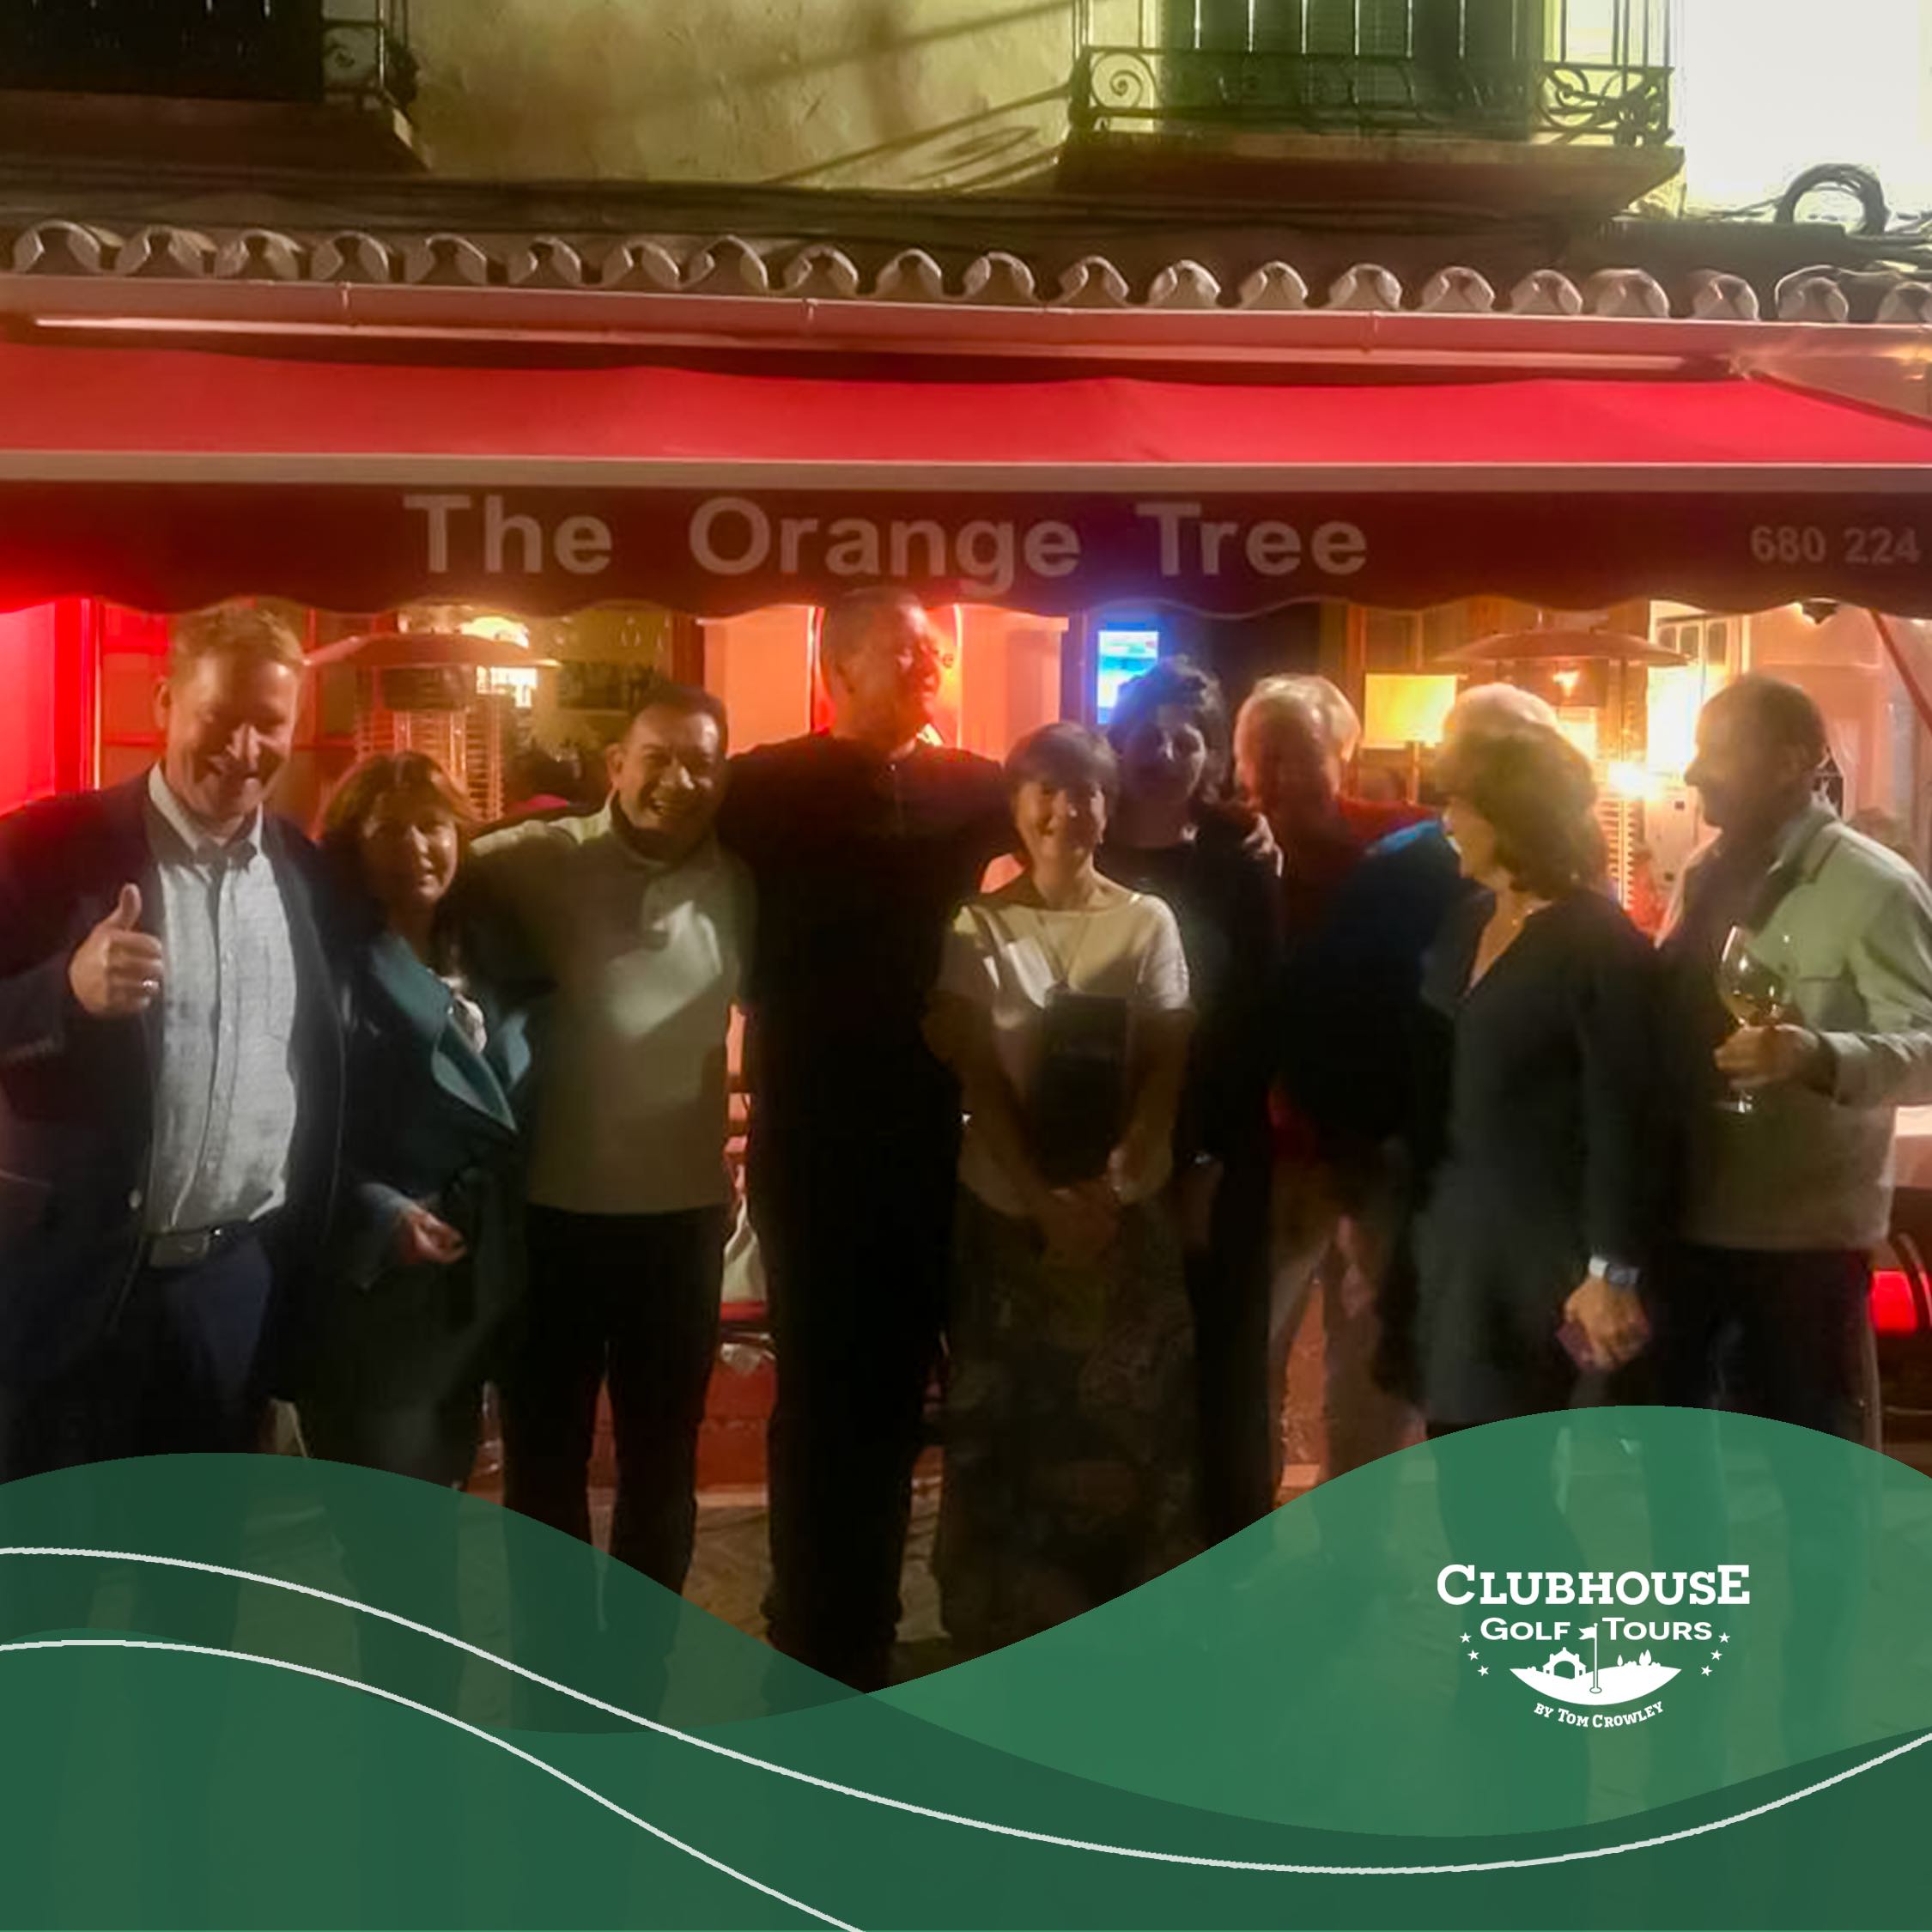 Winners from the Clubhouse golf society tournament of 2 Santa’s from left Snorte Flaten 4th. Wine sponsor Olivier Leonardi . Overall winner Frank Ammar with a massive 80 pts. Ladies winner Eileen O Meara 67 pts.Susan Mulligan 3rd Lady. Tom Curtin 3rd. Ladies runner up Eithne Cusack. Simon Richards 2s